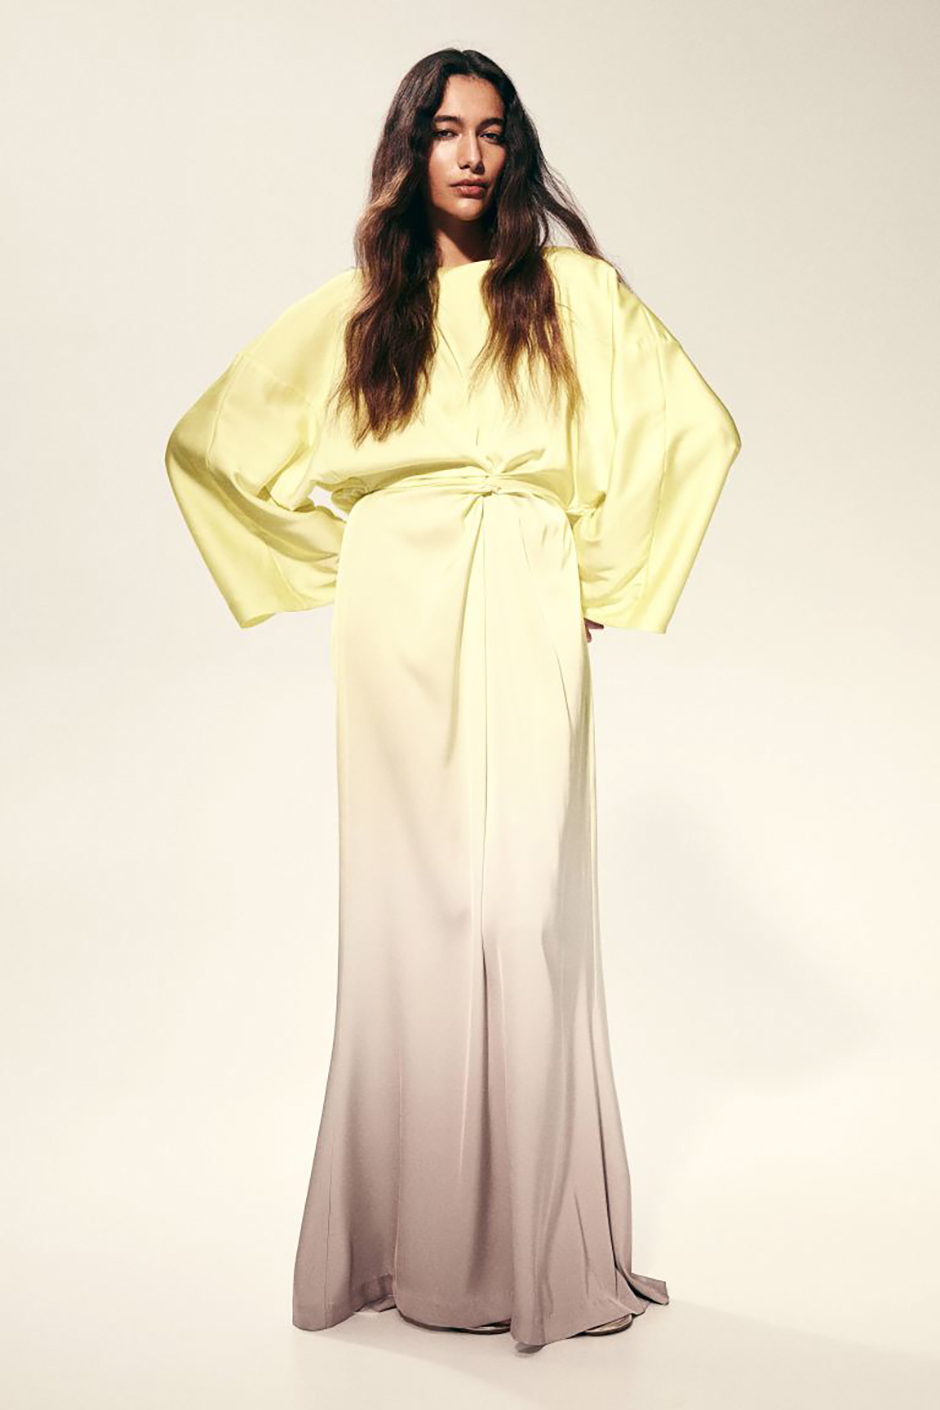 Floor length gown with twist detail at the waist and draped long sleeves in yellow from h&m as summer wedding guest dress idea